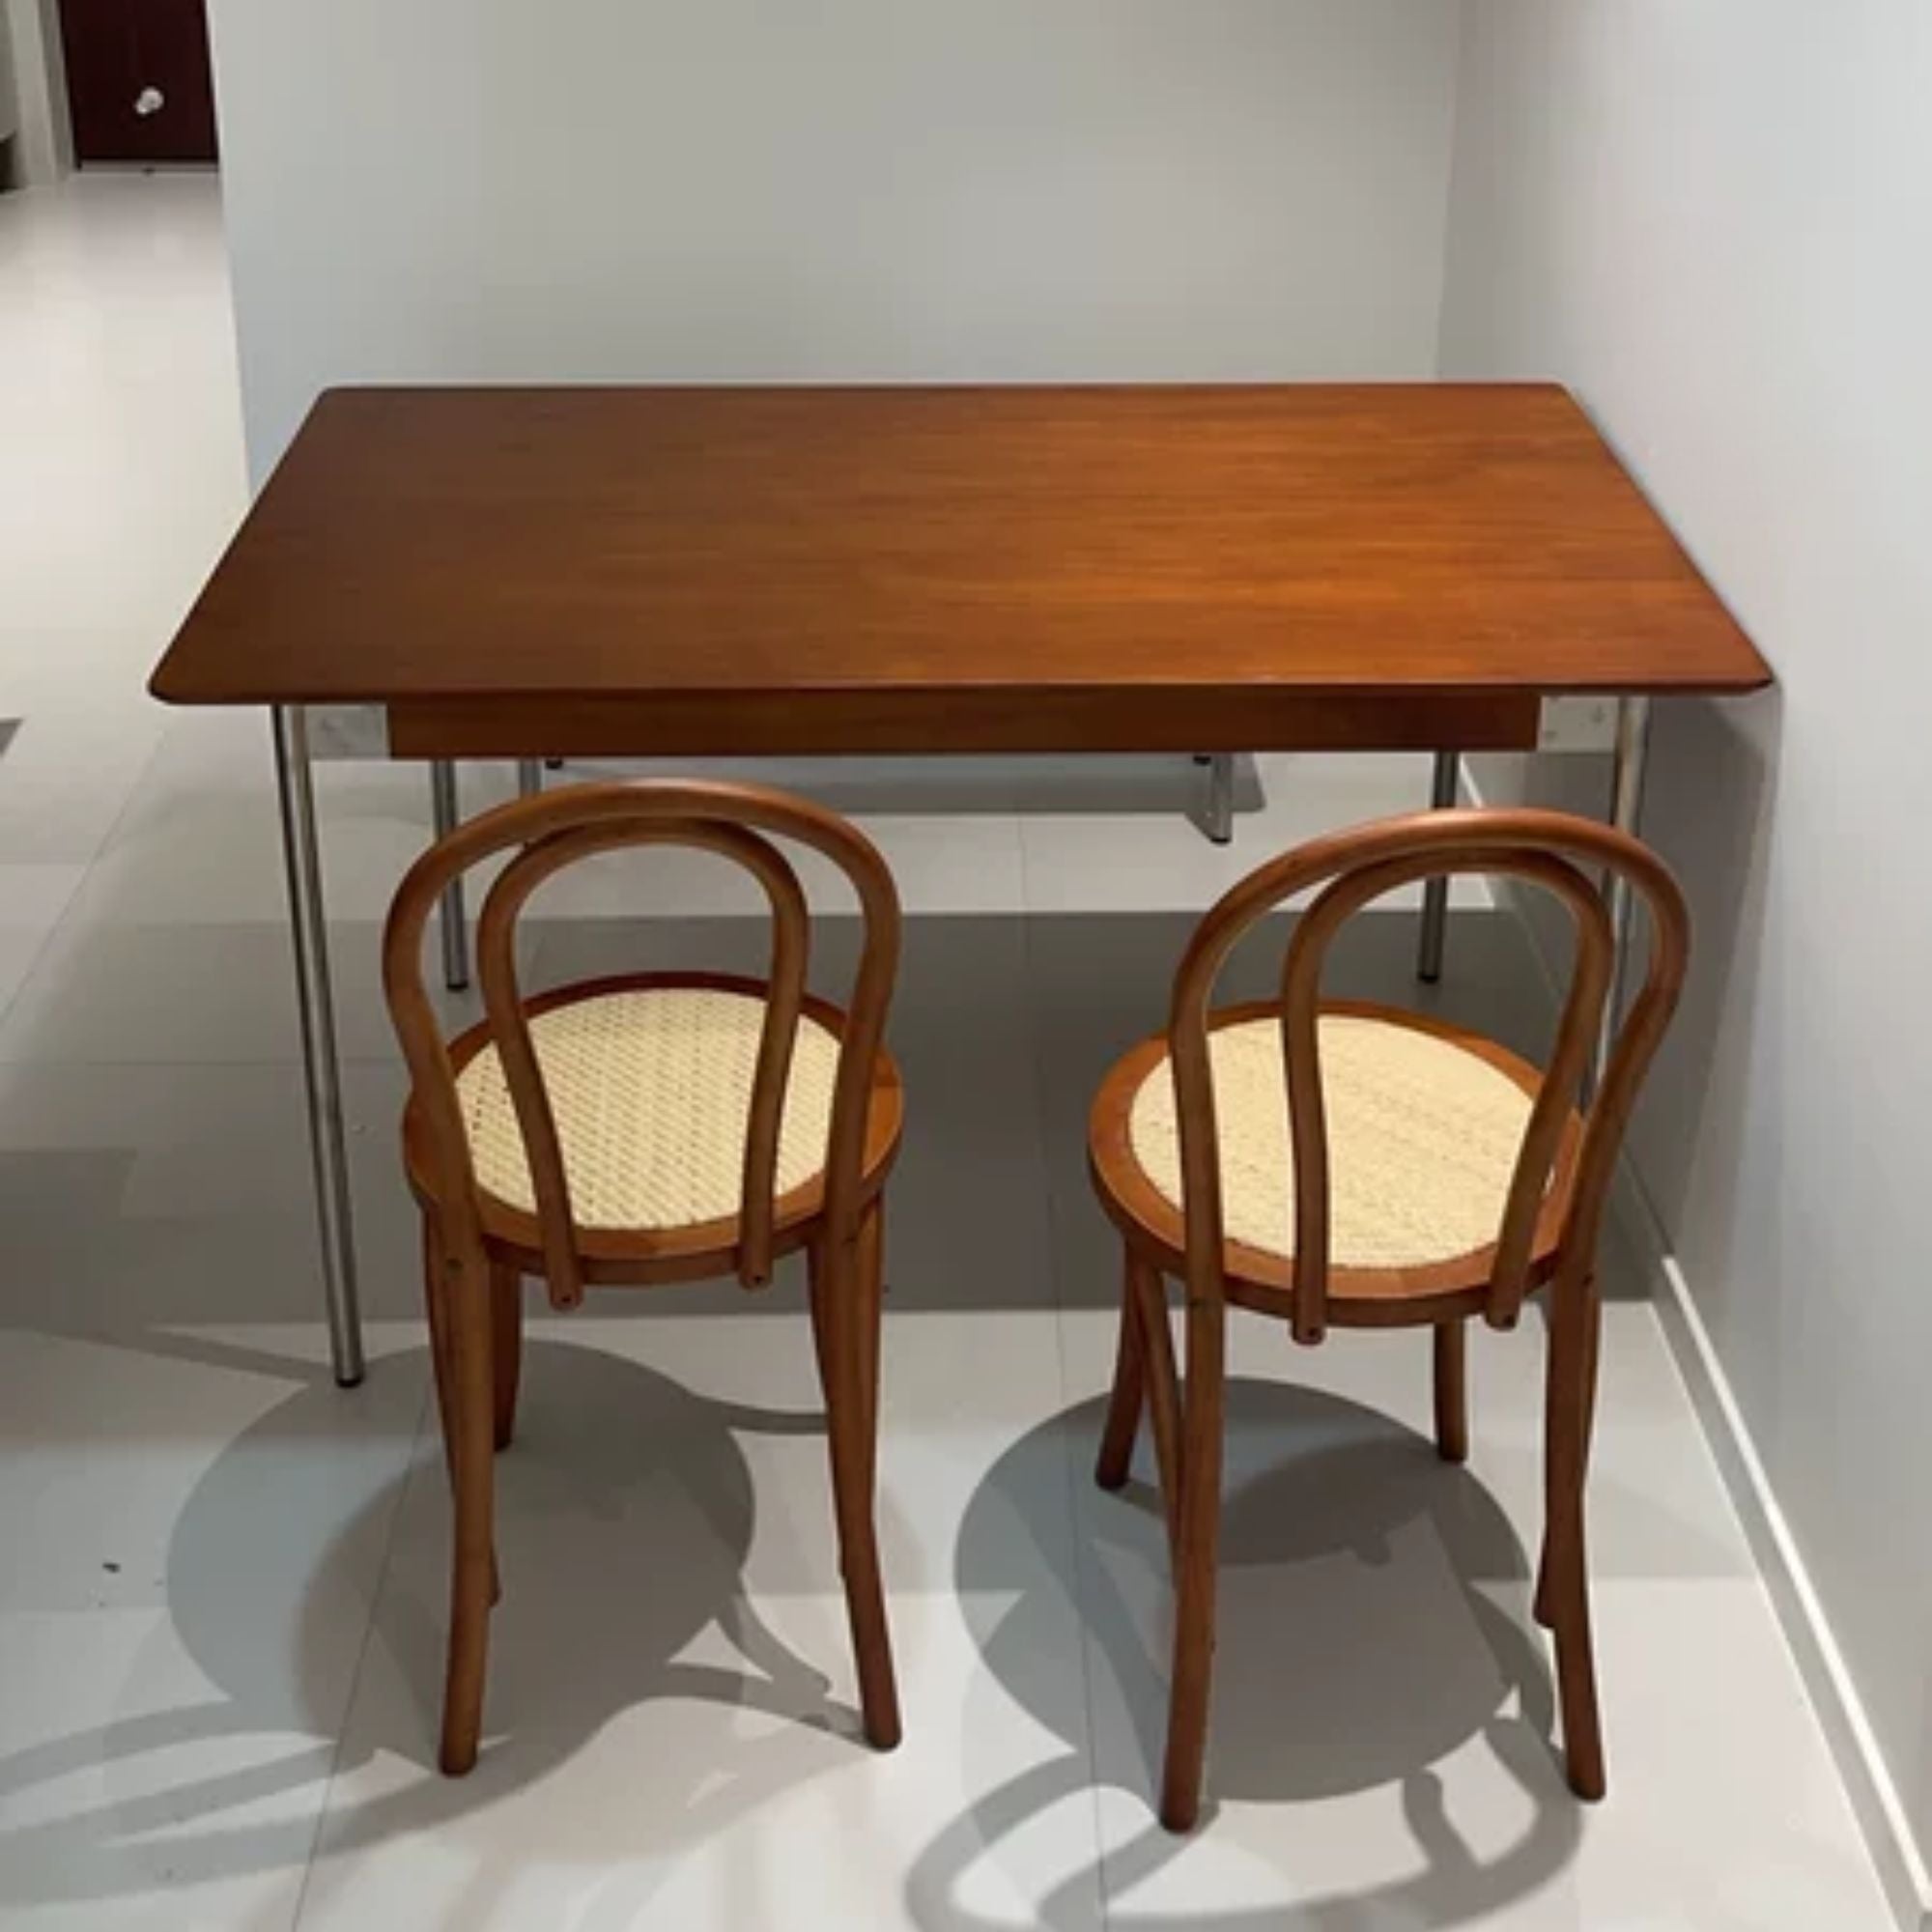 Taylor wood table